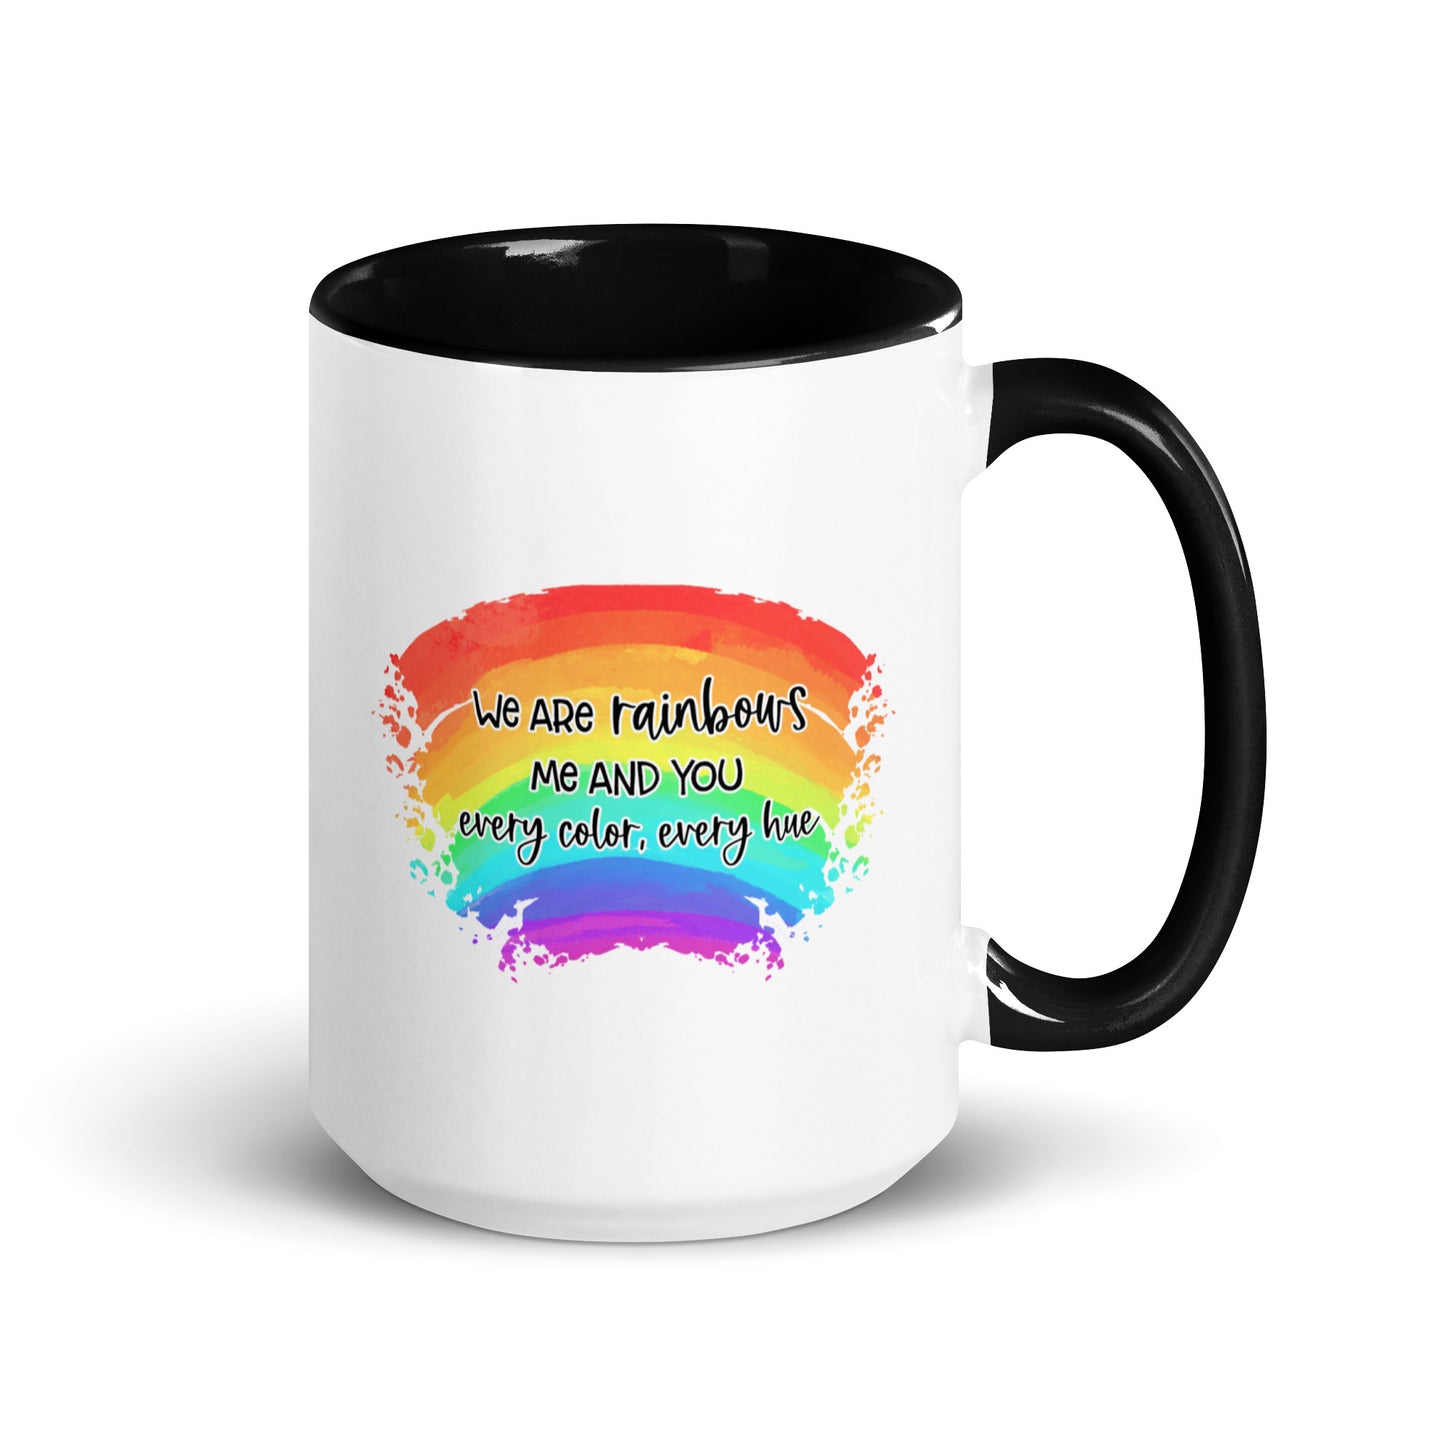 We Are Rainbows Mug in two sizes